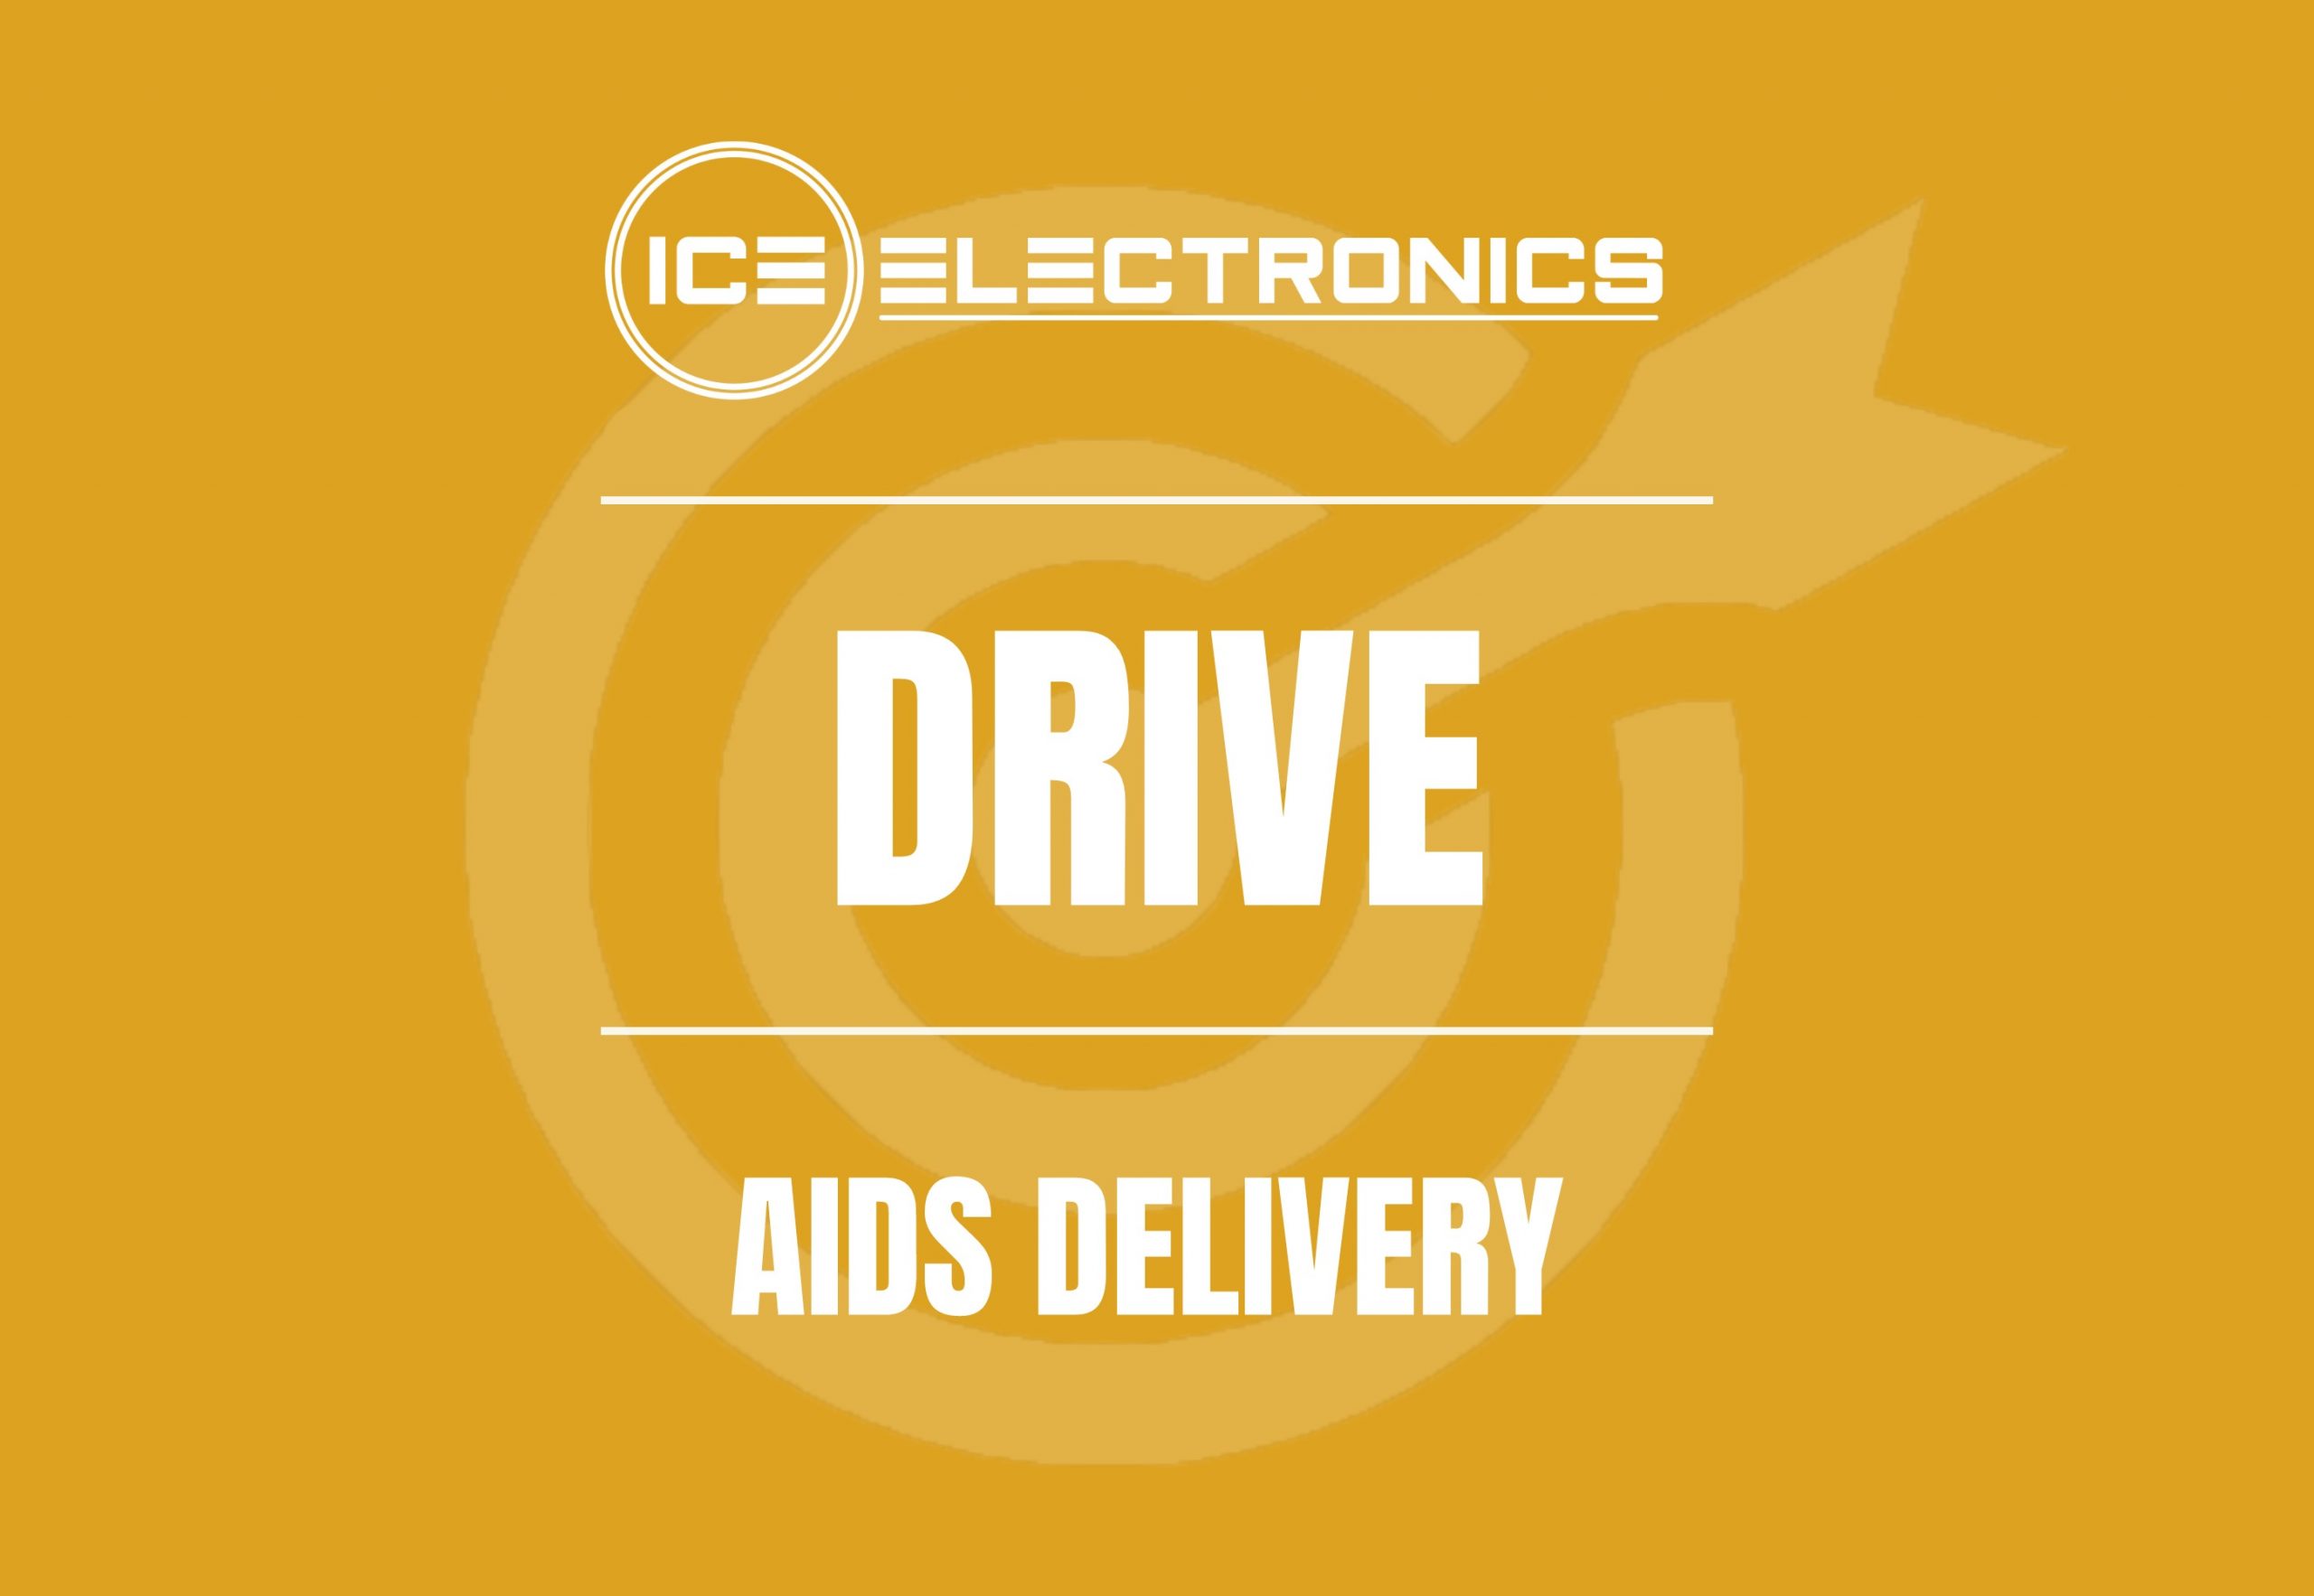 ICE Electronics - drive aids delivery